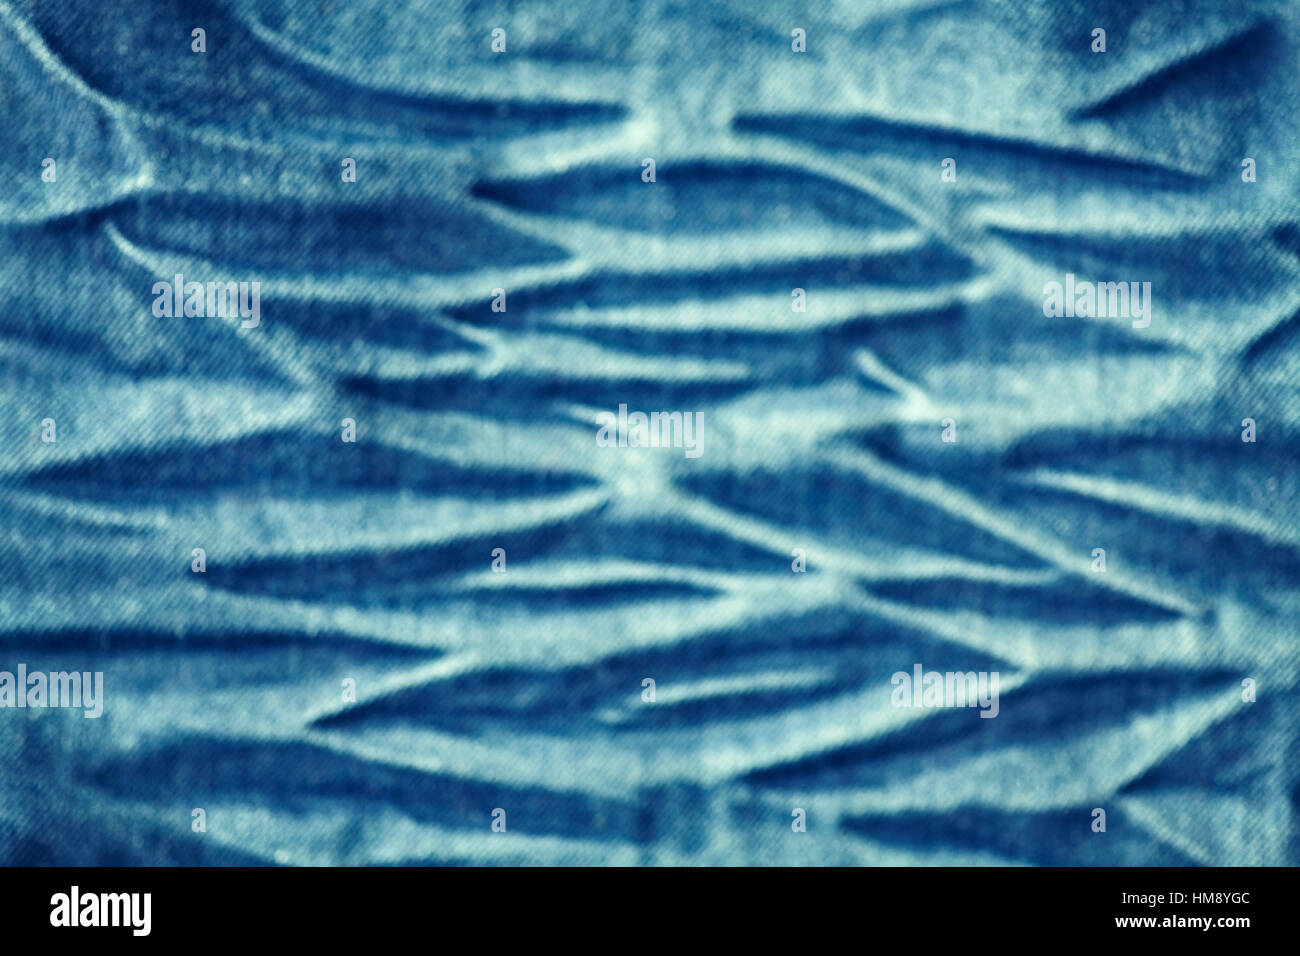 Blurred close up picture of wrinkled jeans fabric, abstract background. Stock Photo